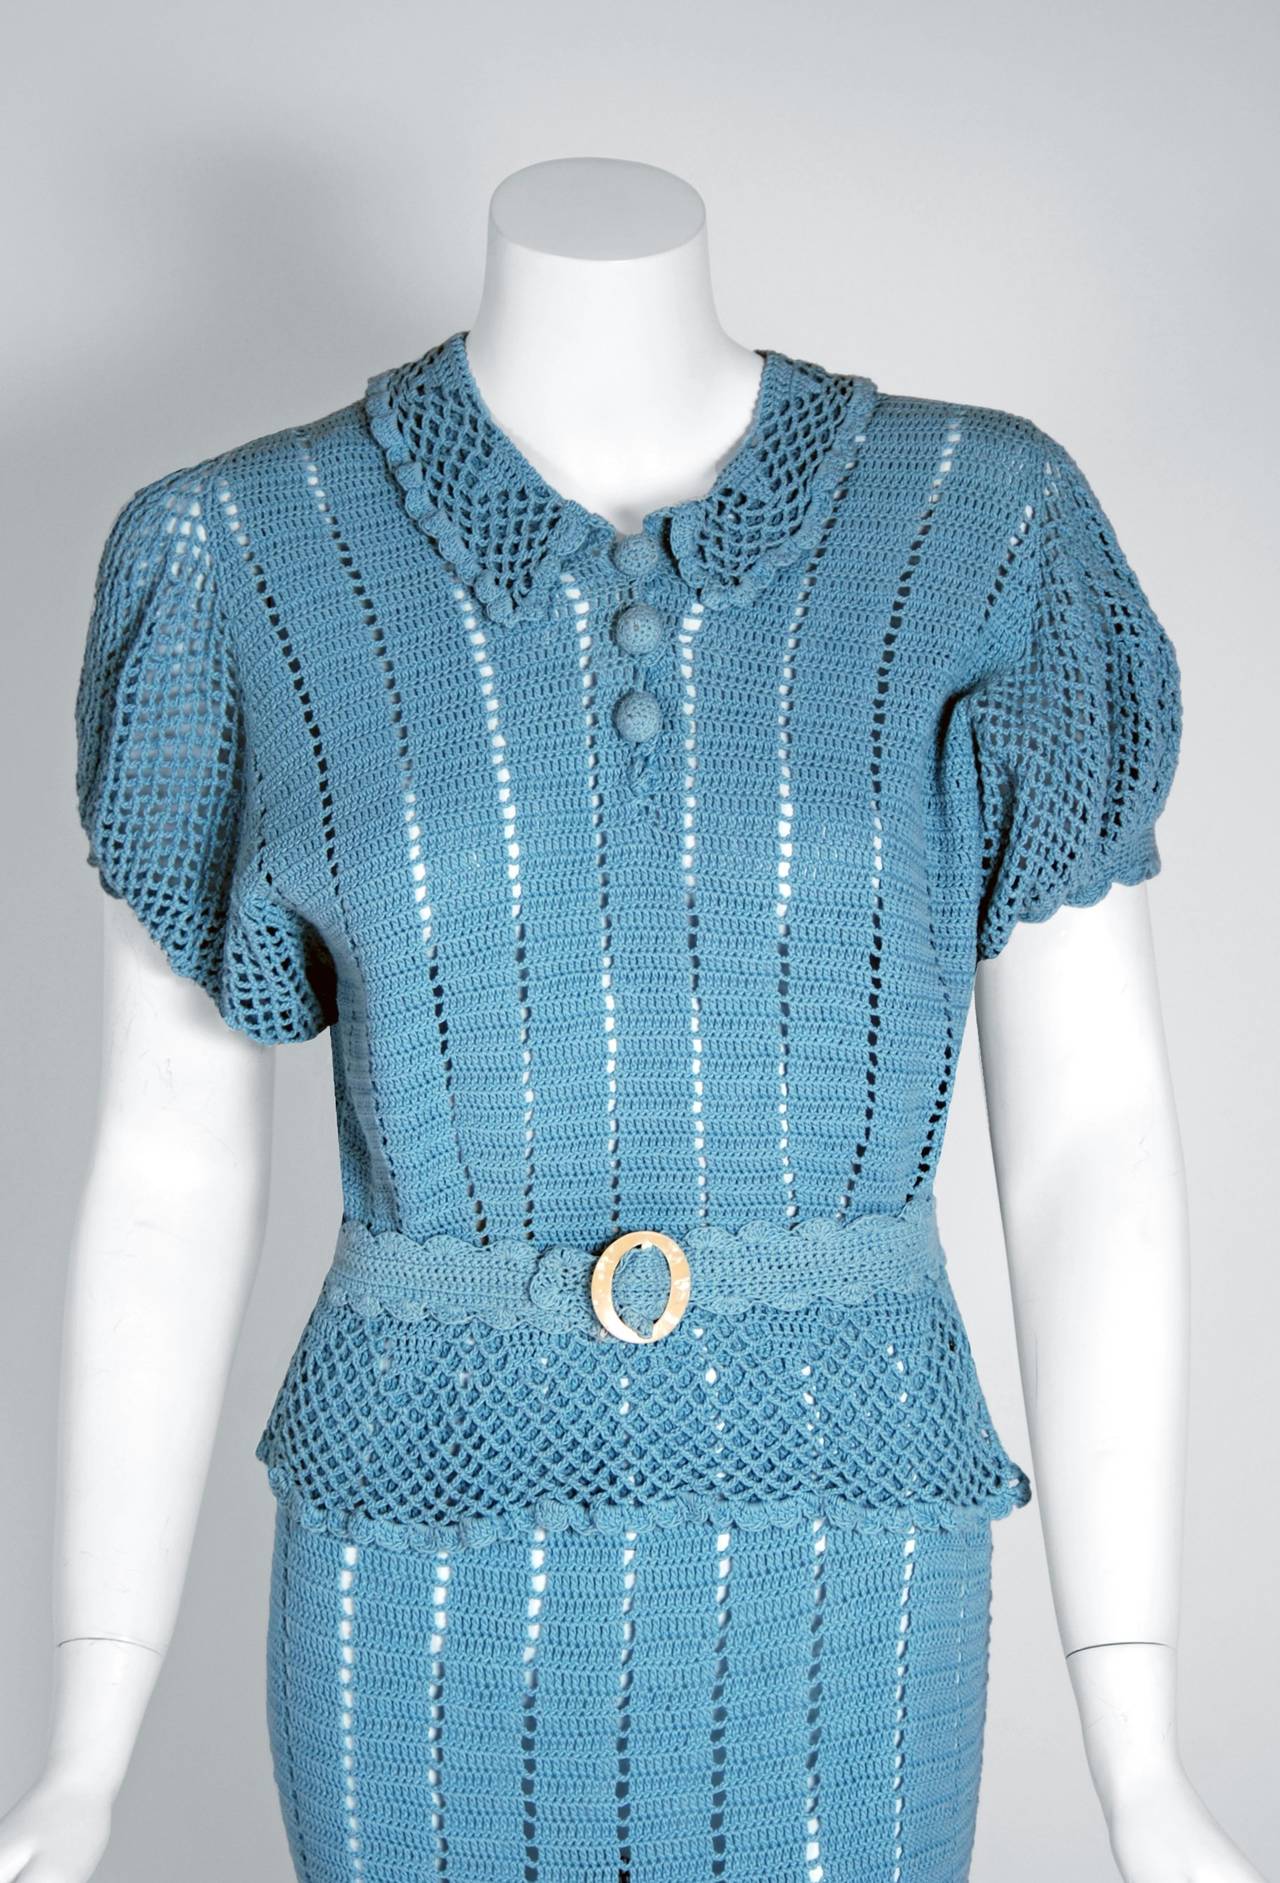 An alluring baby-blue knit crochet ensemble from the 